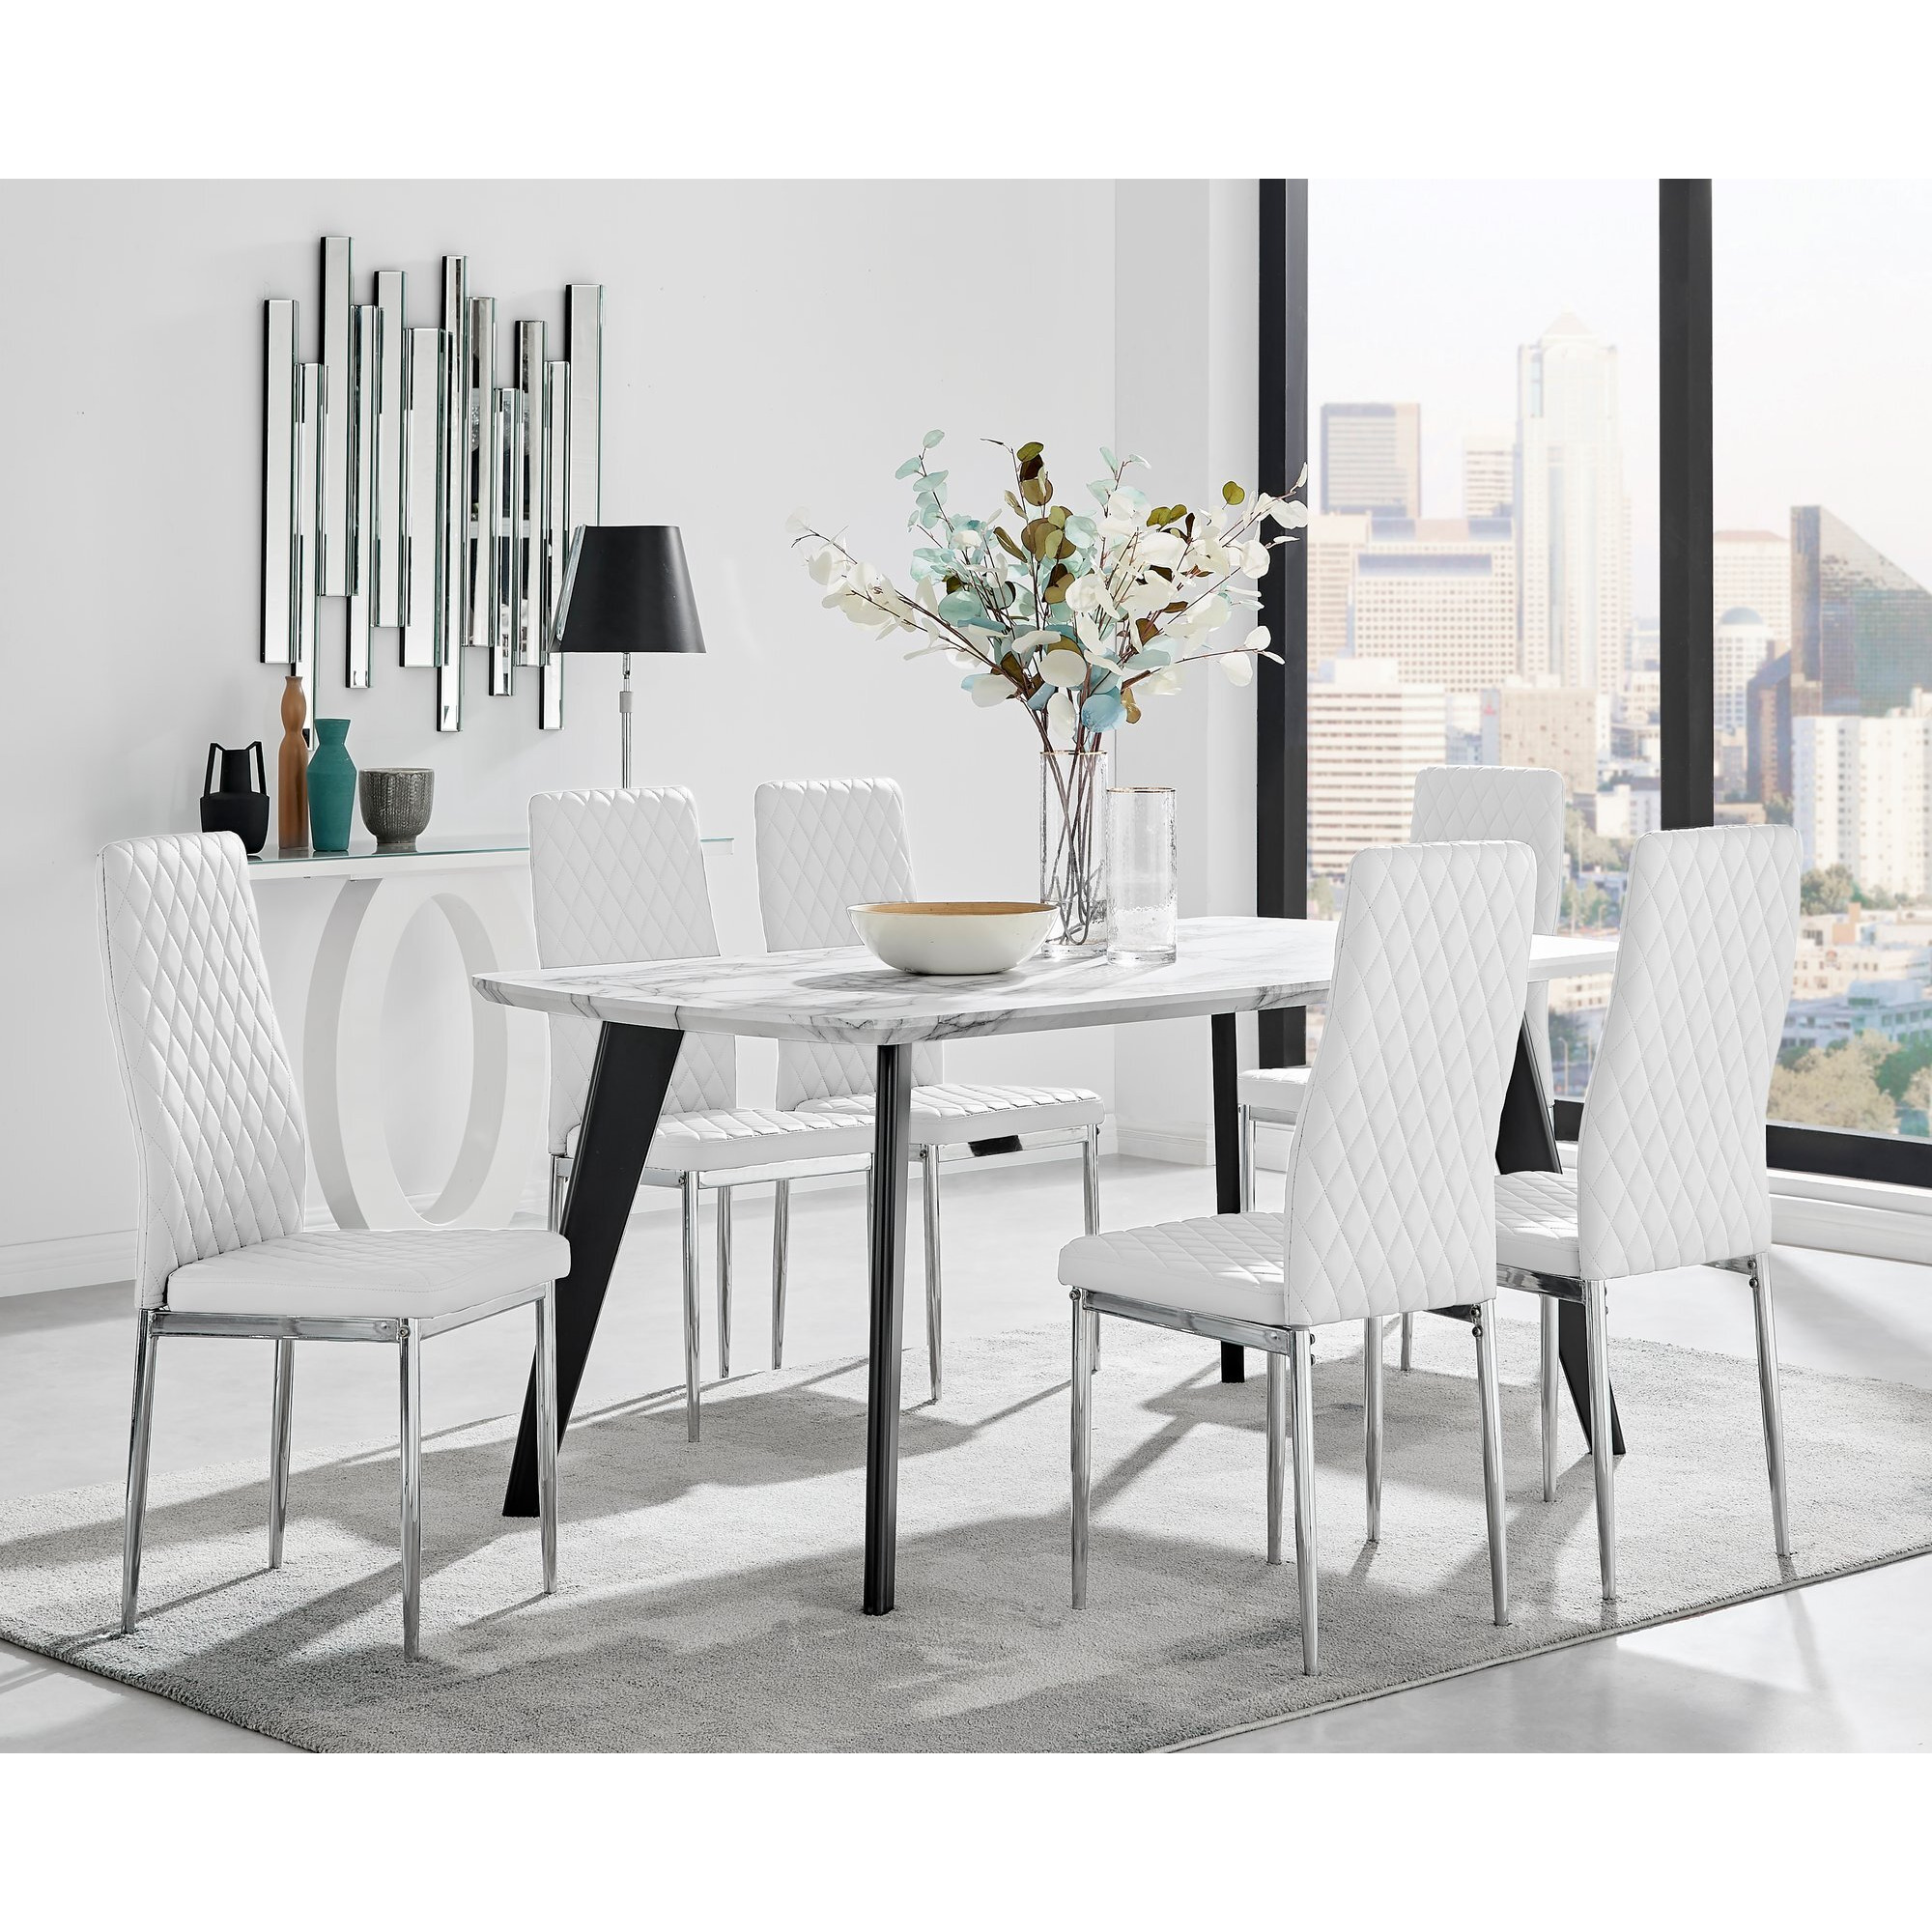 Andria Black Leg Marble Effect Dining Table and 6 Milan Chairs